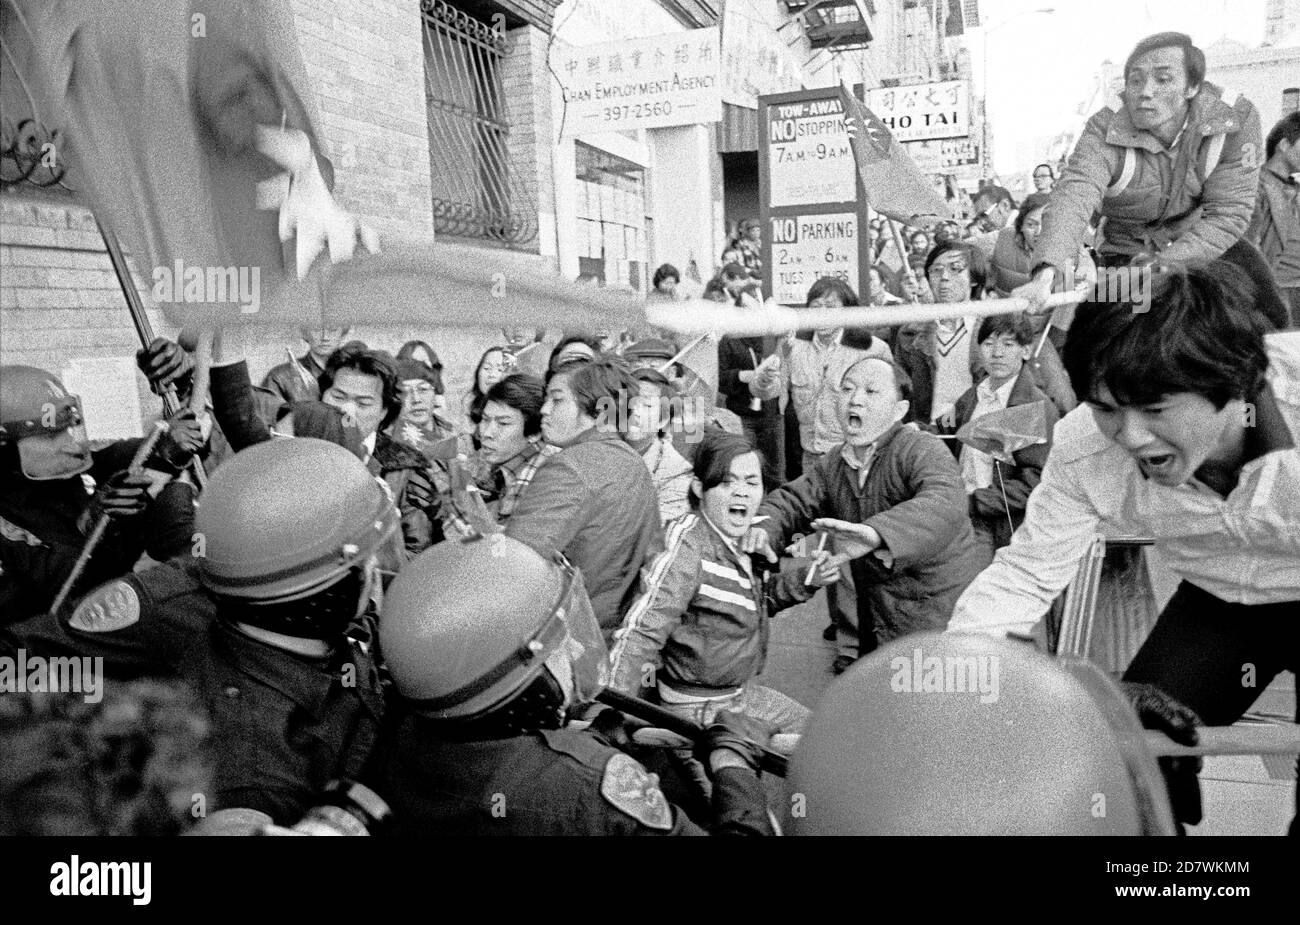 San Francisco Police face demonstrators in Chinatown opposed to the US recognition of the communist People's Republic if China on January 1, 1979 Stock Photo